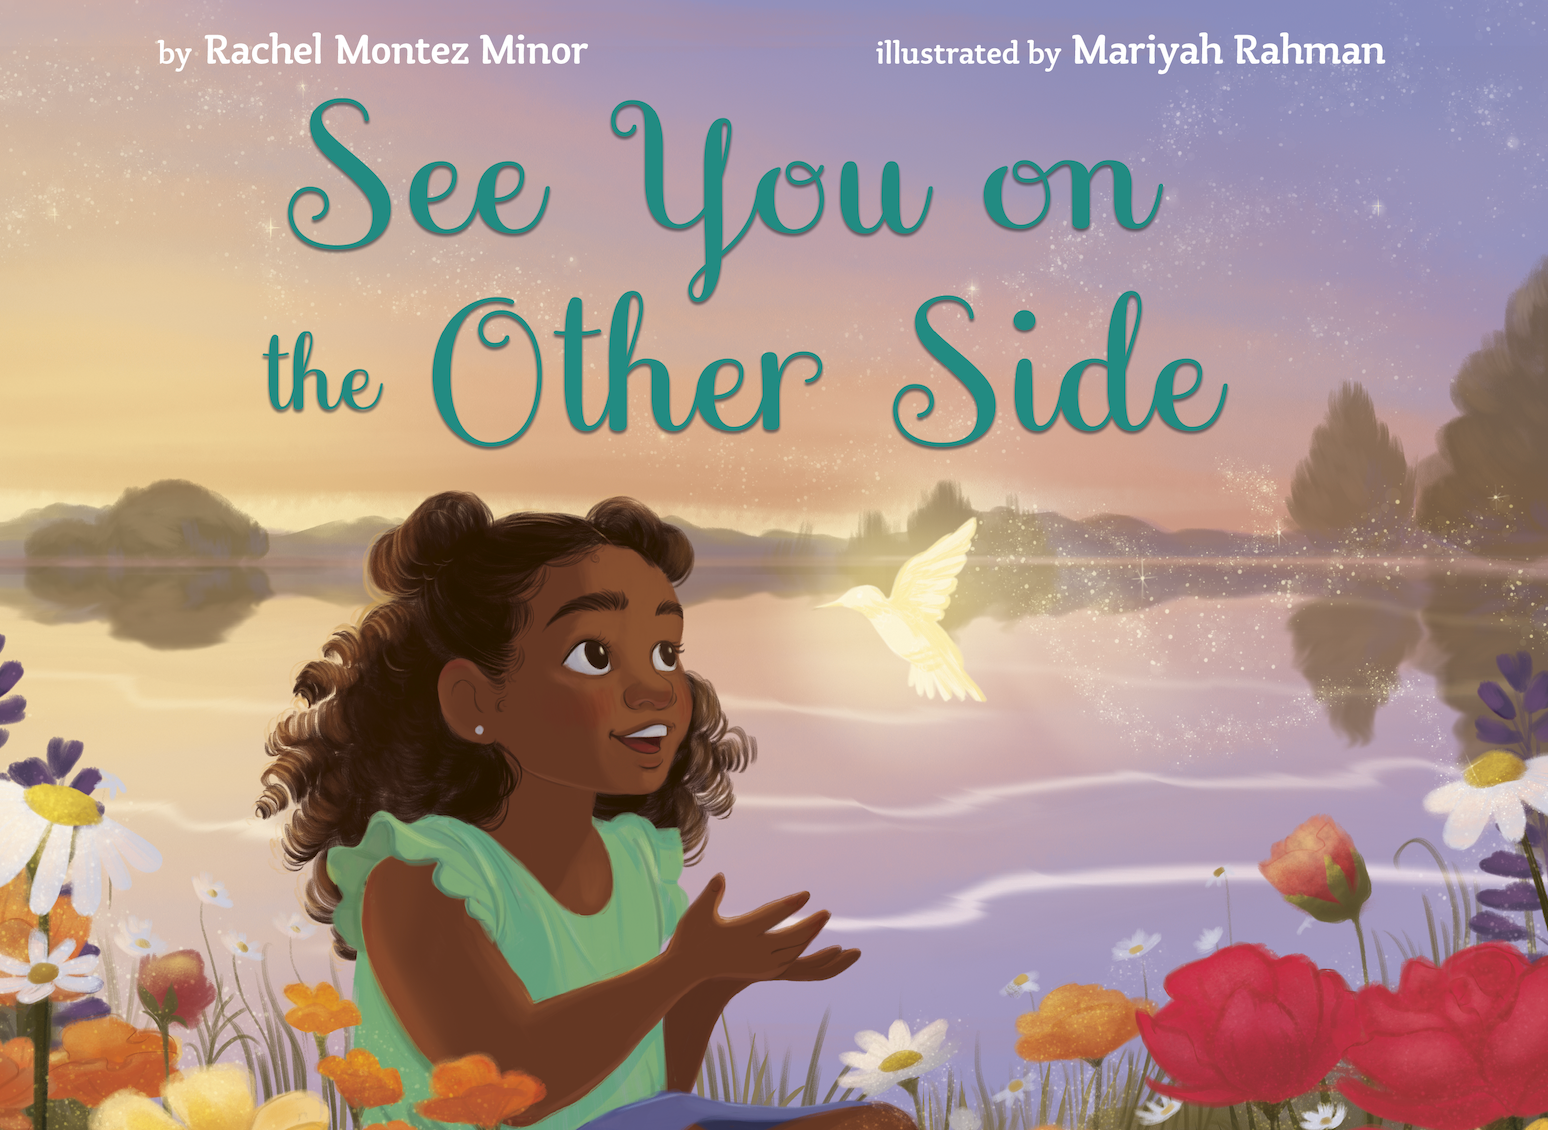 Rachel Montez Minor's New Children's Book About Loss Came To Her In A Dream